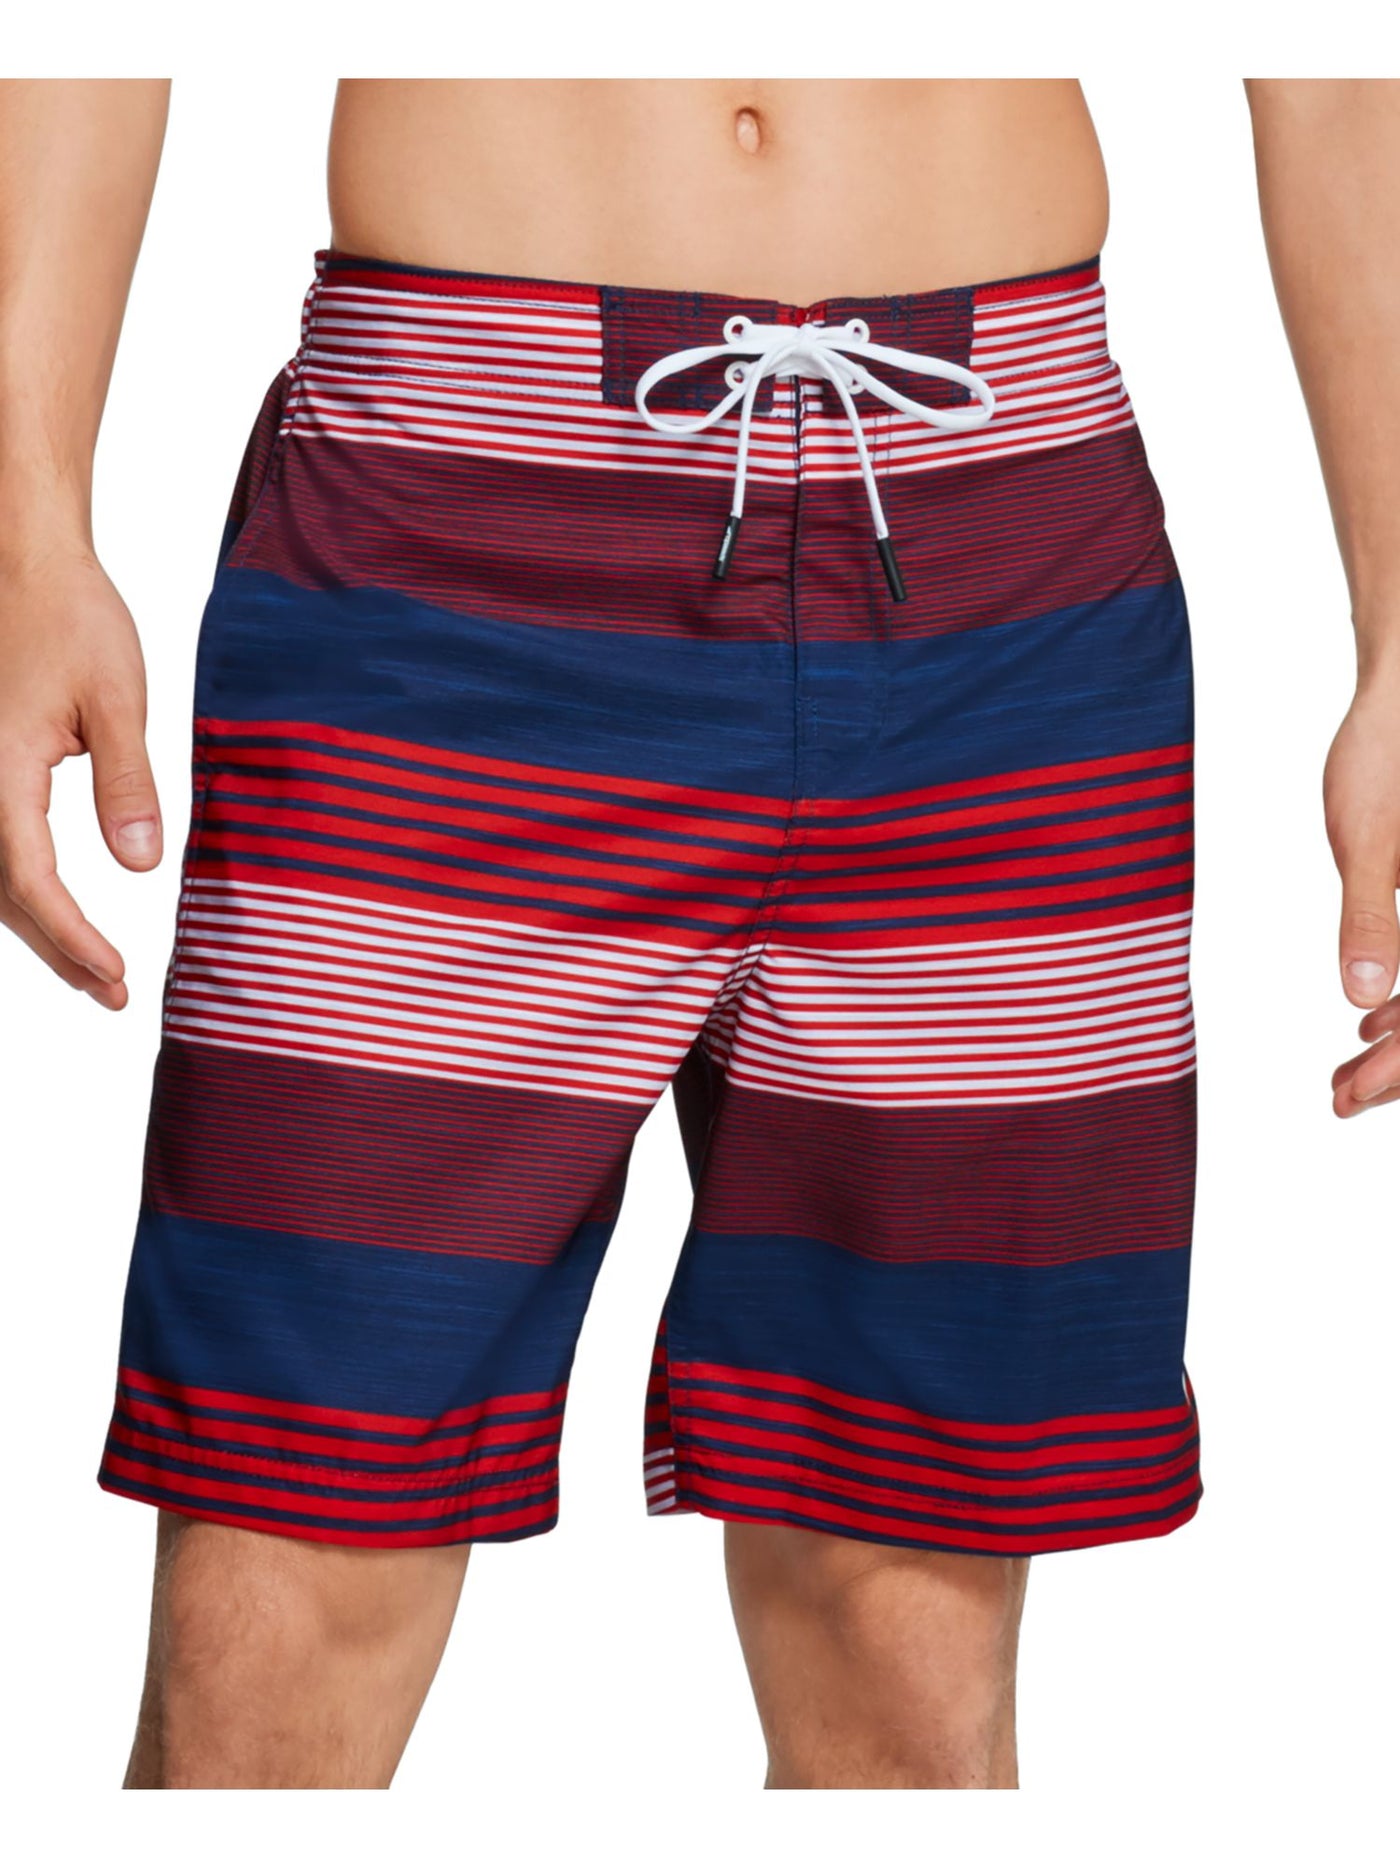 SPEEDO Mens Red Lined Shorts L